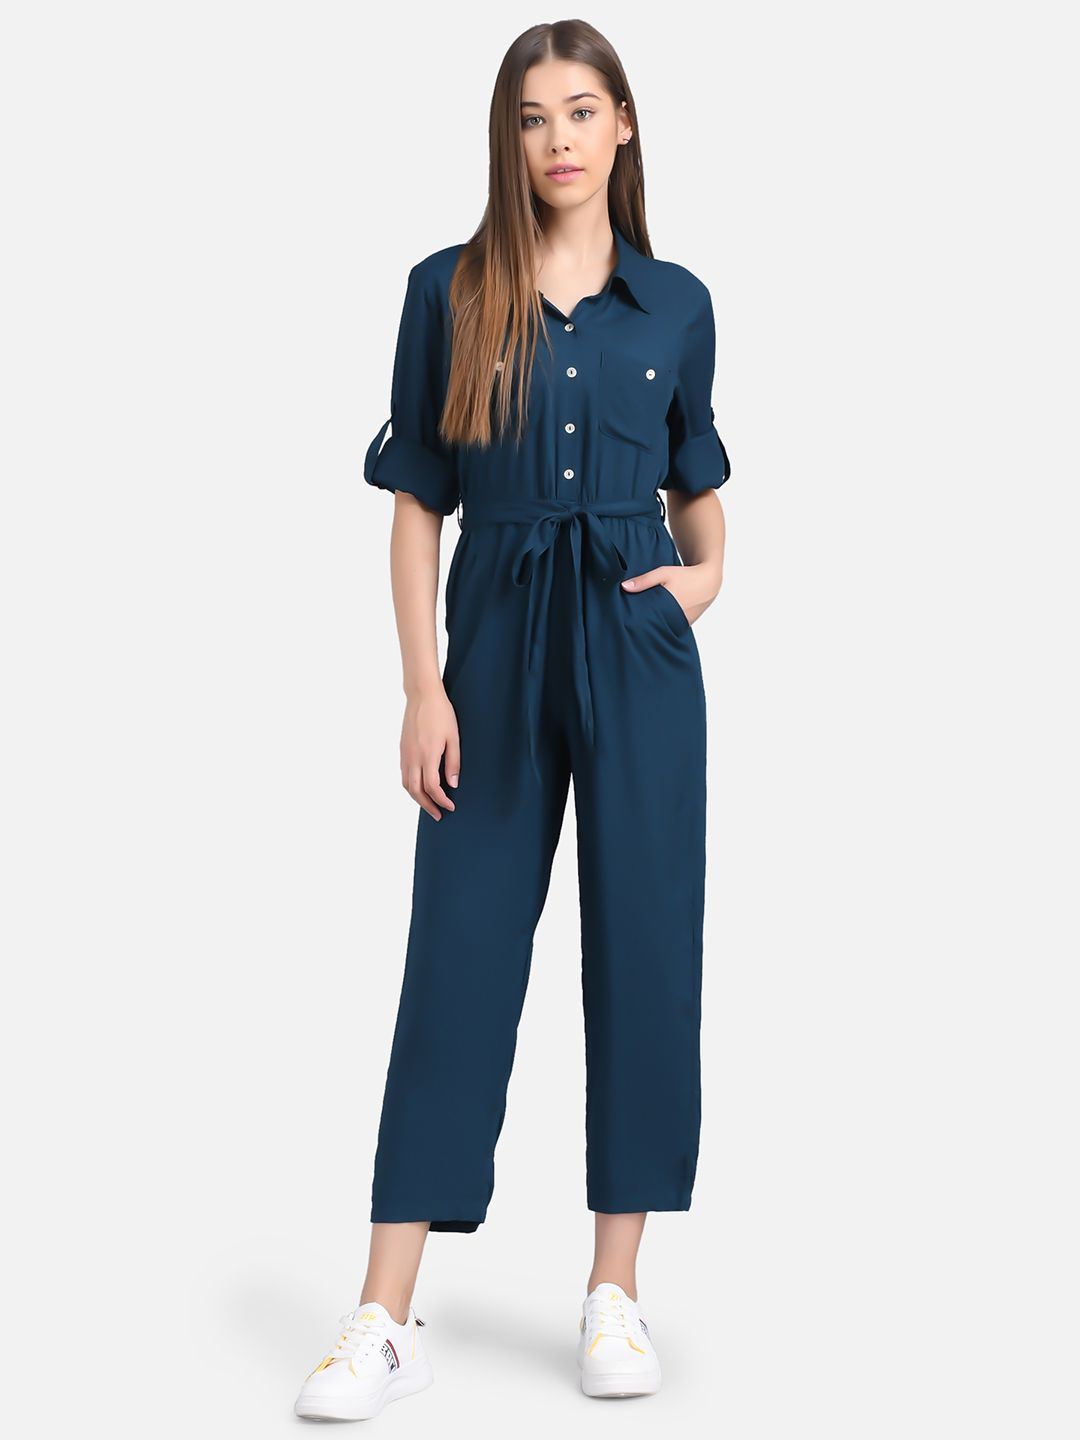 The Dry State Women Teal Blue Solid Basic Jumpsuit Price in India